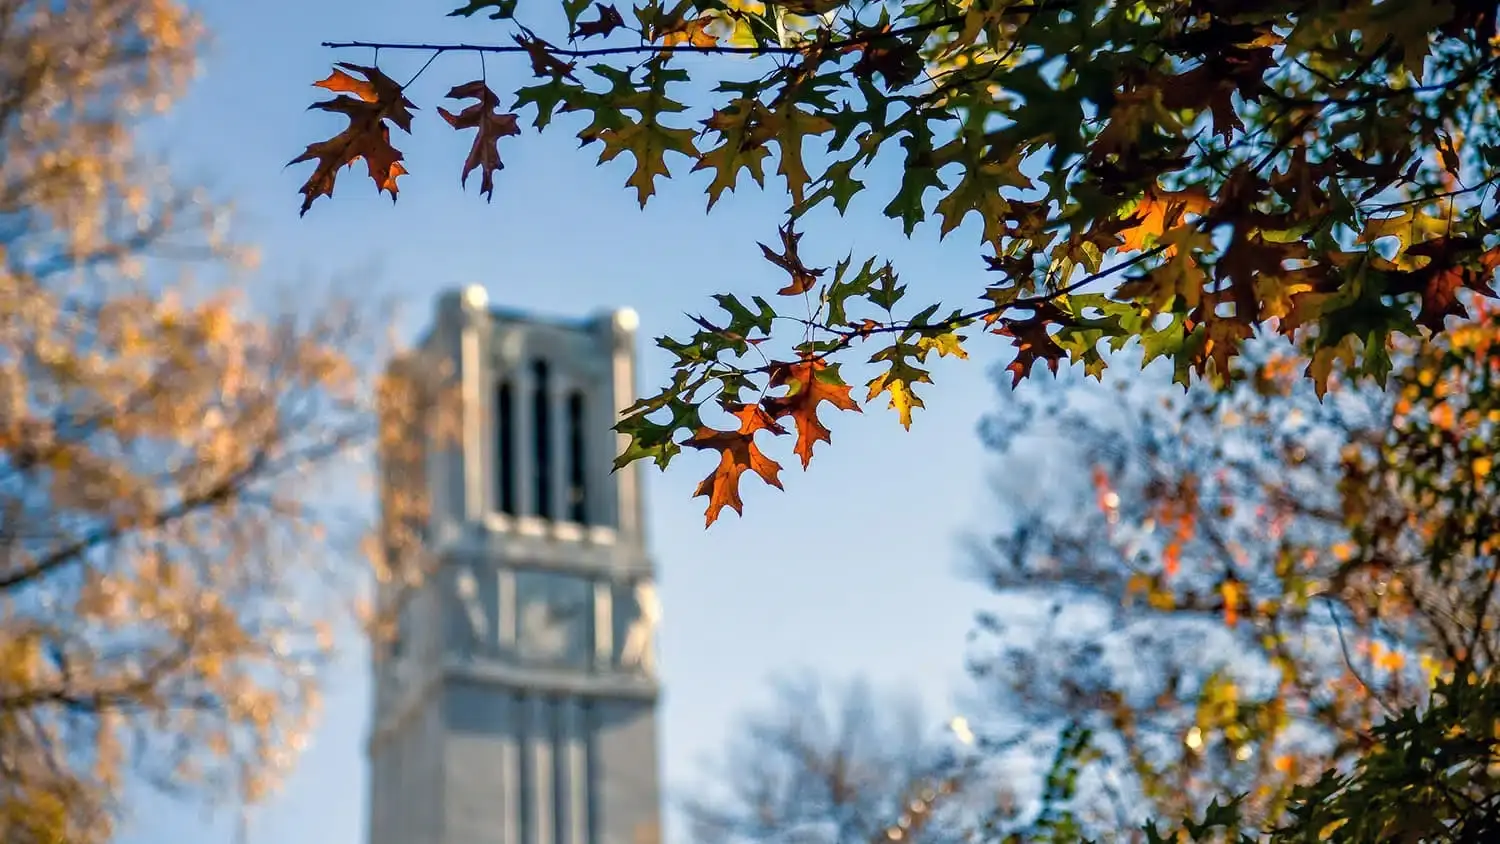 Near the Belltower, leaves begin to change color for the season.